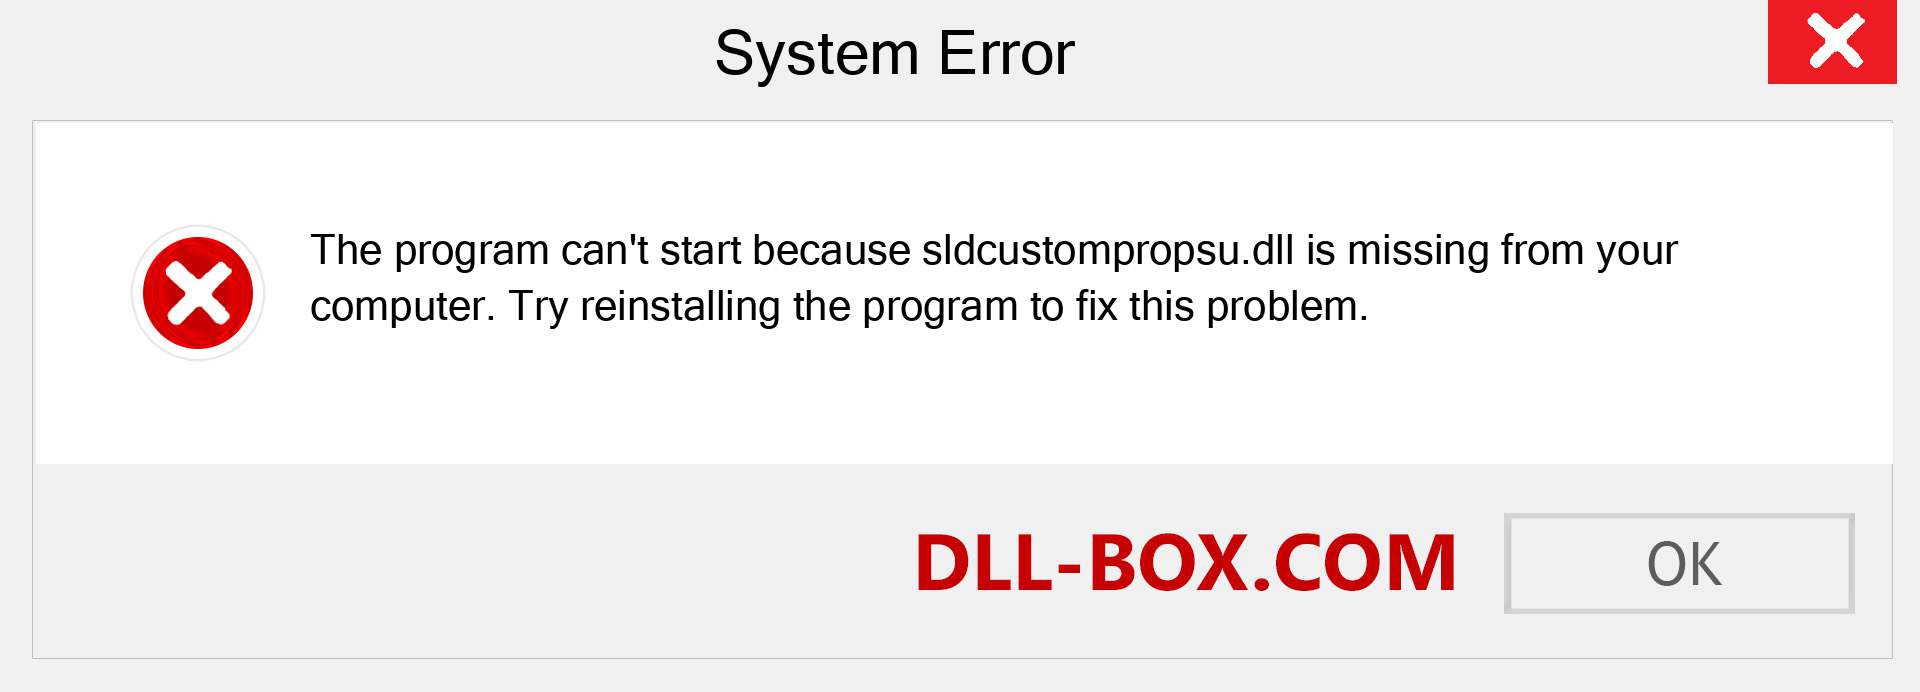  sldcustompropsu.dll file is missing?. Download for Windows 7, 8, 10 - Fix  sldcustompropsu dll Missing Error on Windows, photos, images